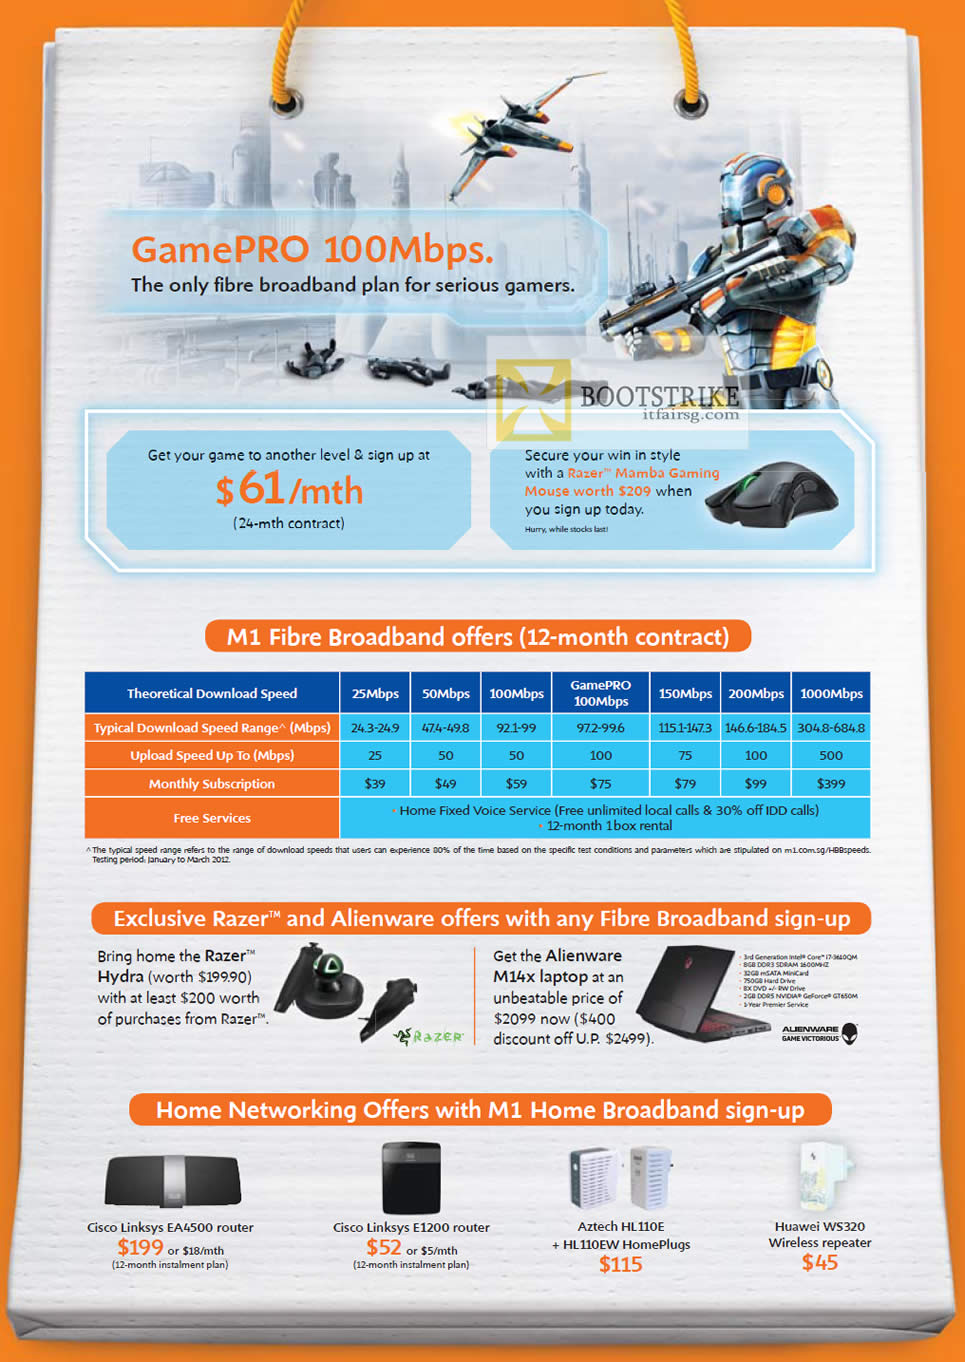 PC SHOW 2012 price list image brochure of M1 Broadband GamePRO 100Mbps, Cisco Linksys EA4500 Router, E1200, Aztech HL110E, HL110EW, Huawei WS320 Repeater, Alienware M14x, Razer Hydra